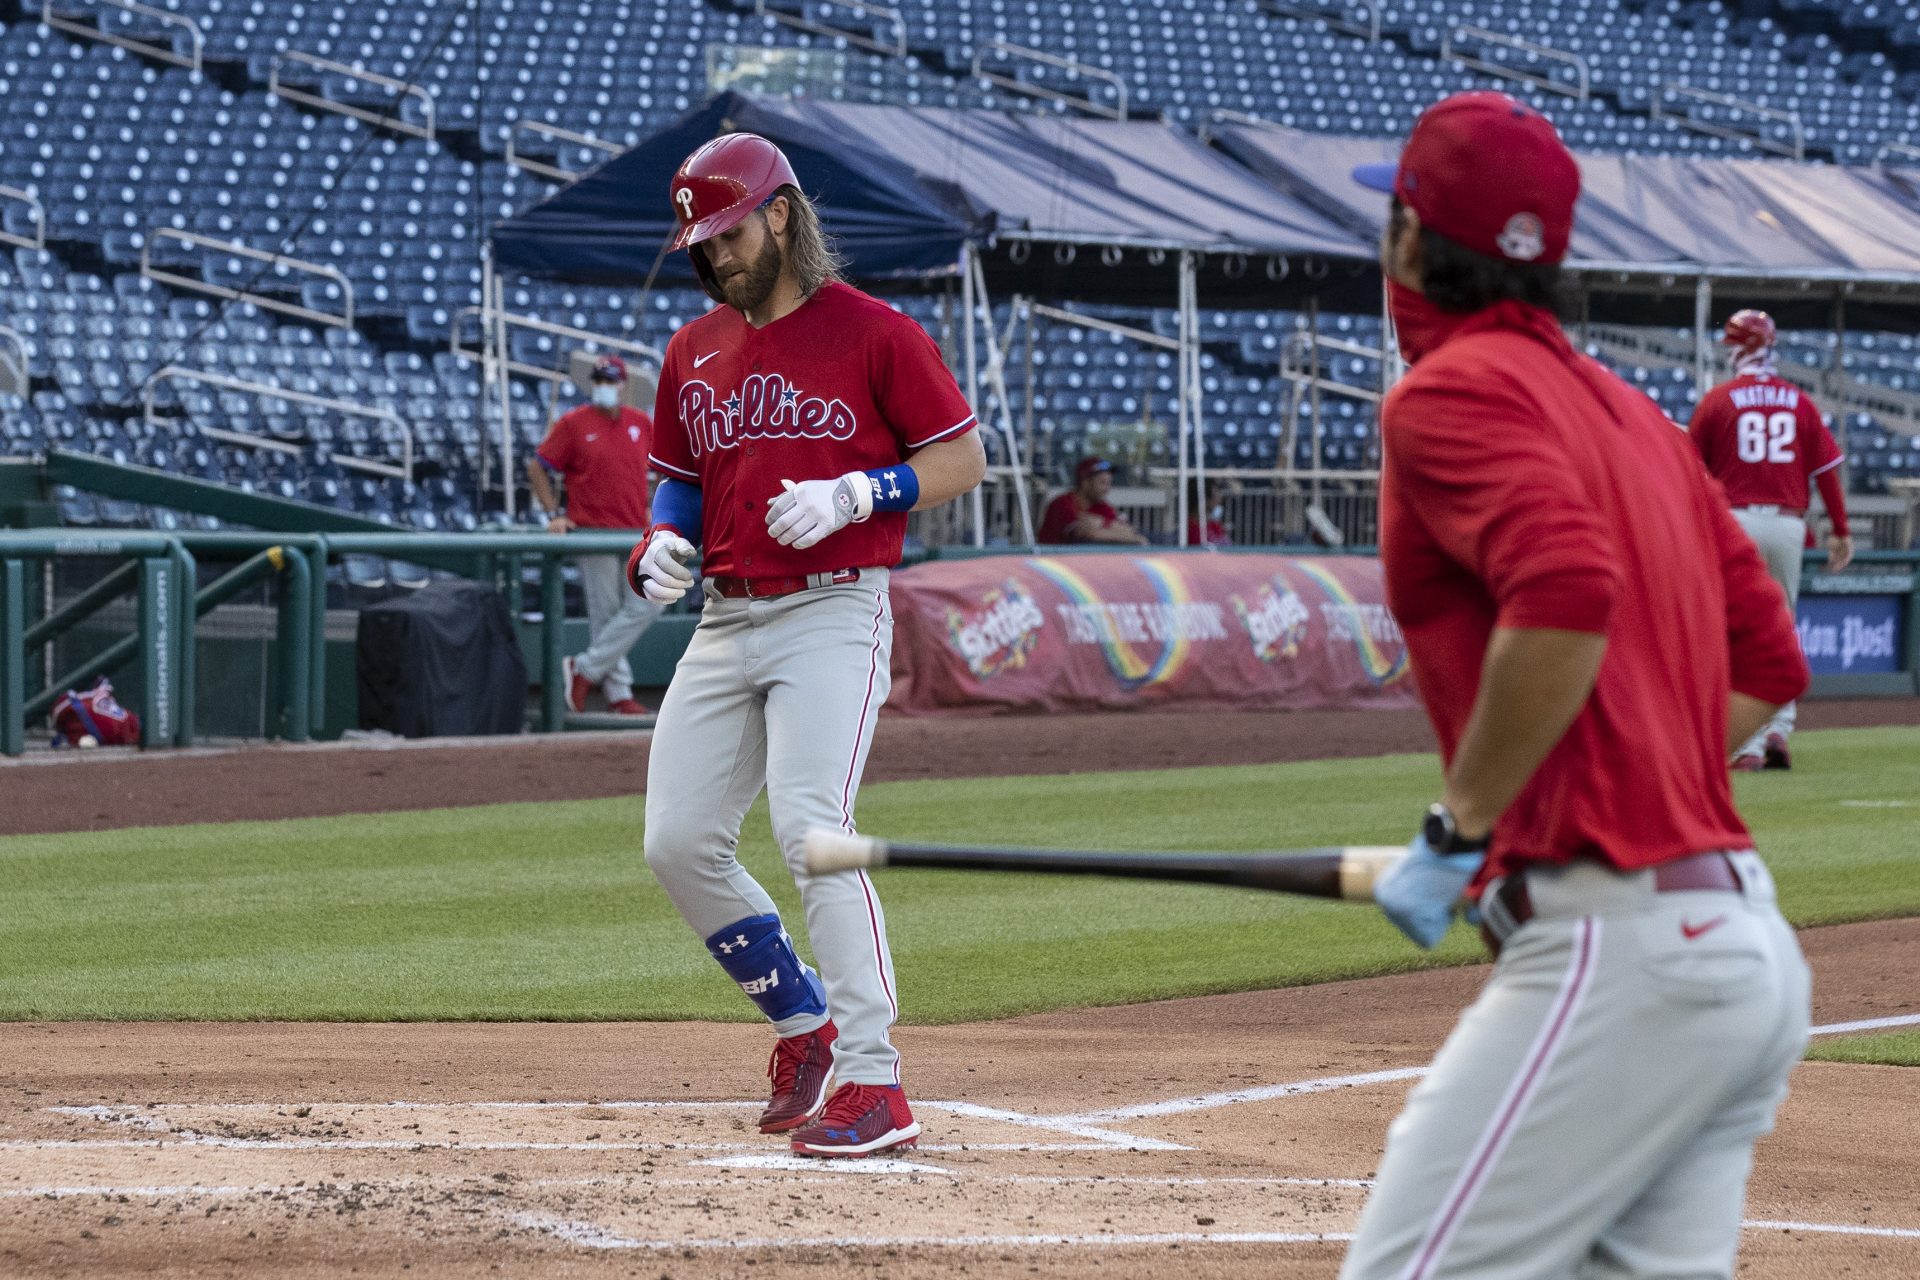 Philadelphia Phillies' Bryce Harper comes home for his three-run homer during the second inning of an exhibition baseball game against the Washington Nationals at Nationals Park, Saturday, July 18, 2020, in Washington. The Phillies won 7-2.